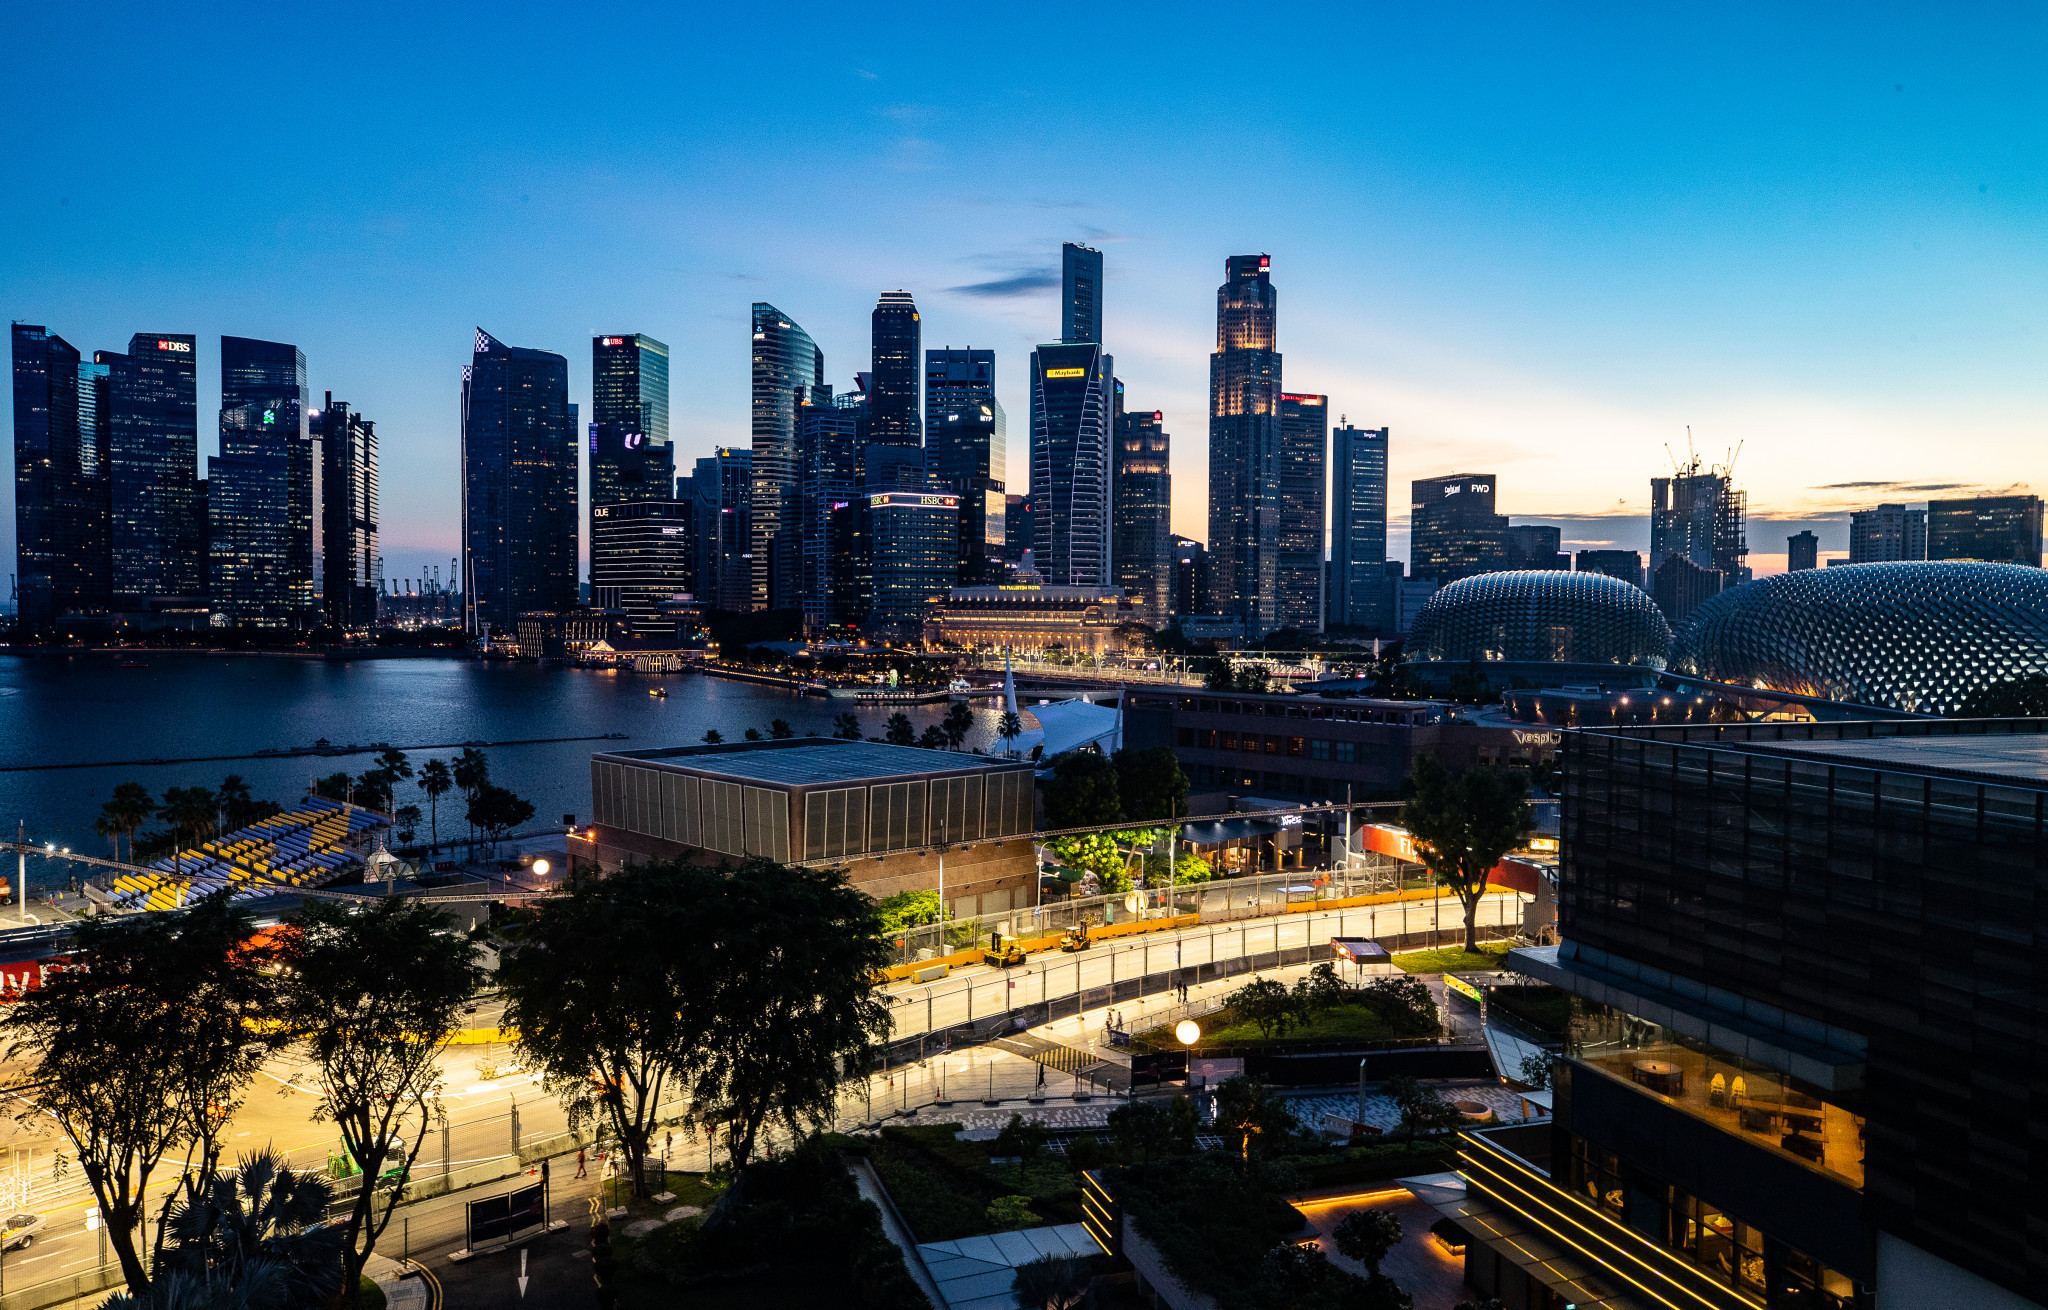 Singapore is due to host the electoral CGF General Assembly from November 11 to 14 this year ©Getty Images (Image obtained at insidethegames.biz)